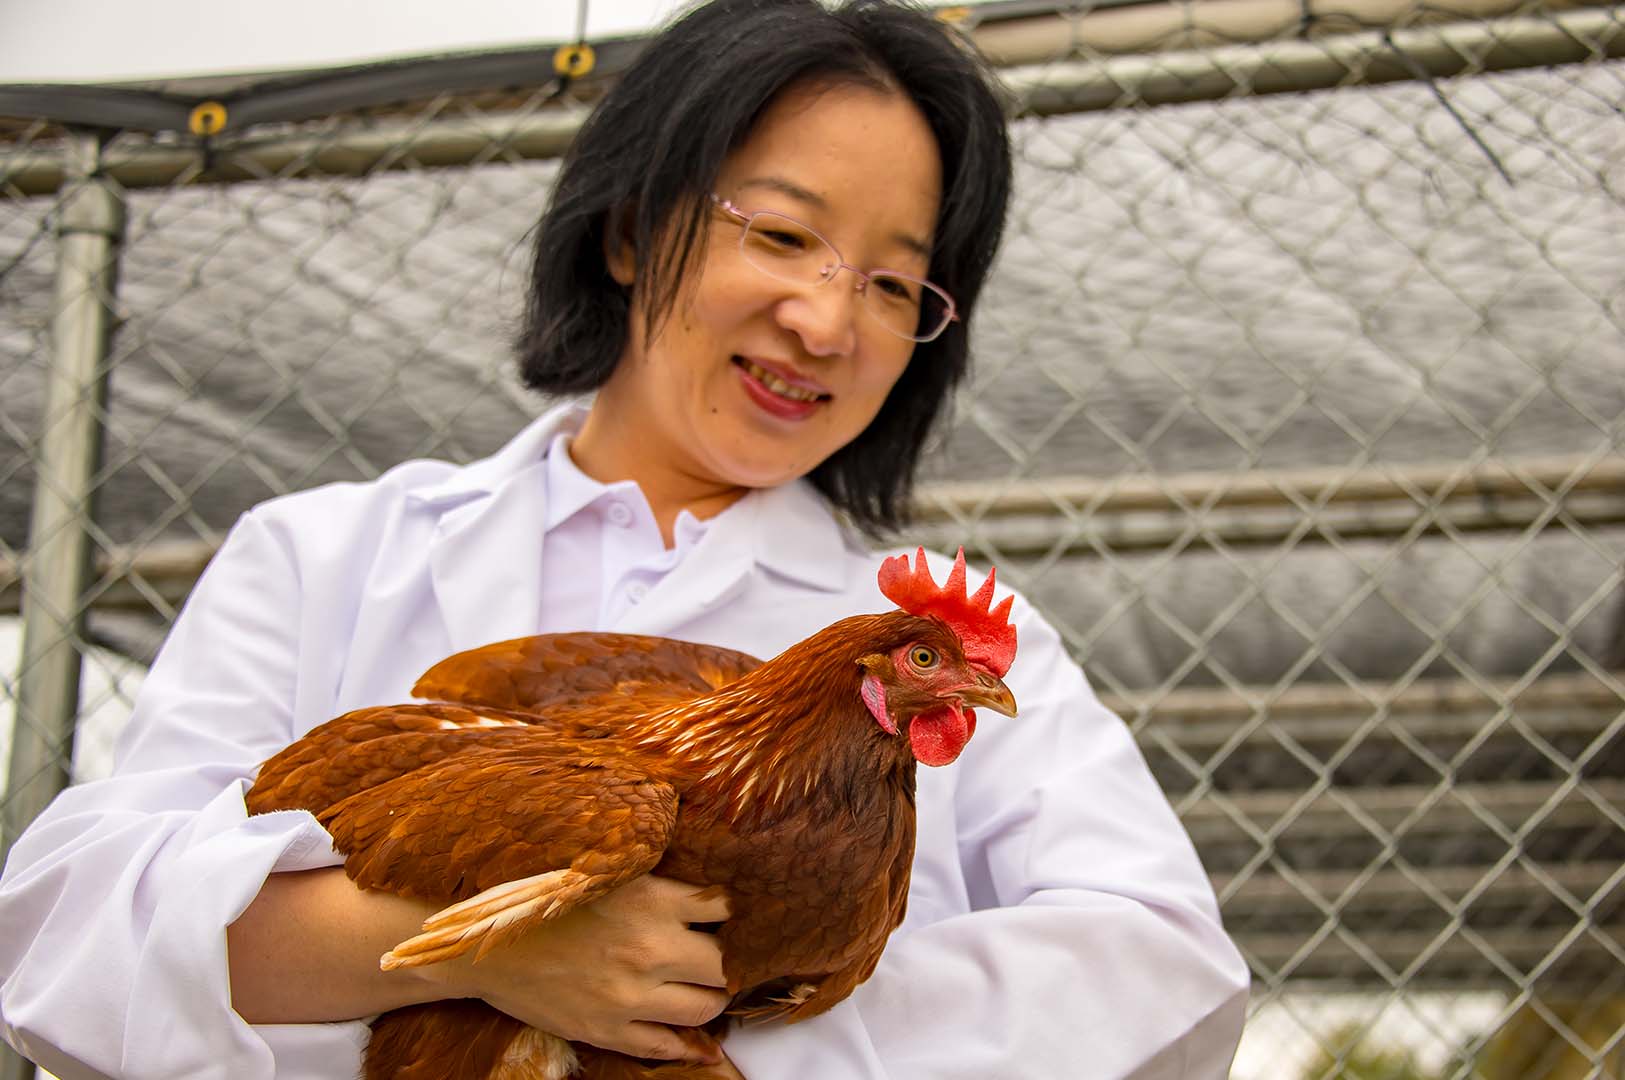 By evaluating long-term and short-term stressors in hens, Dr. Wei Zhai hopes to determine whether or not the autonomous car stresses the chickens. (Photo by David Ammon)